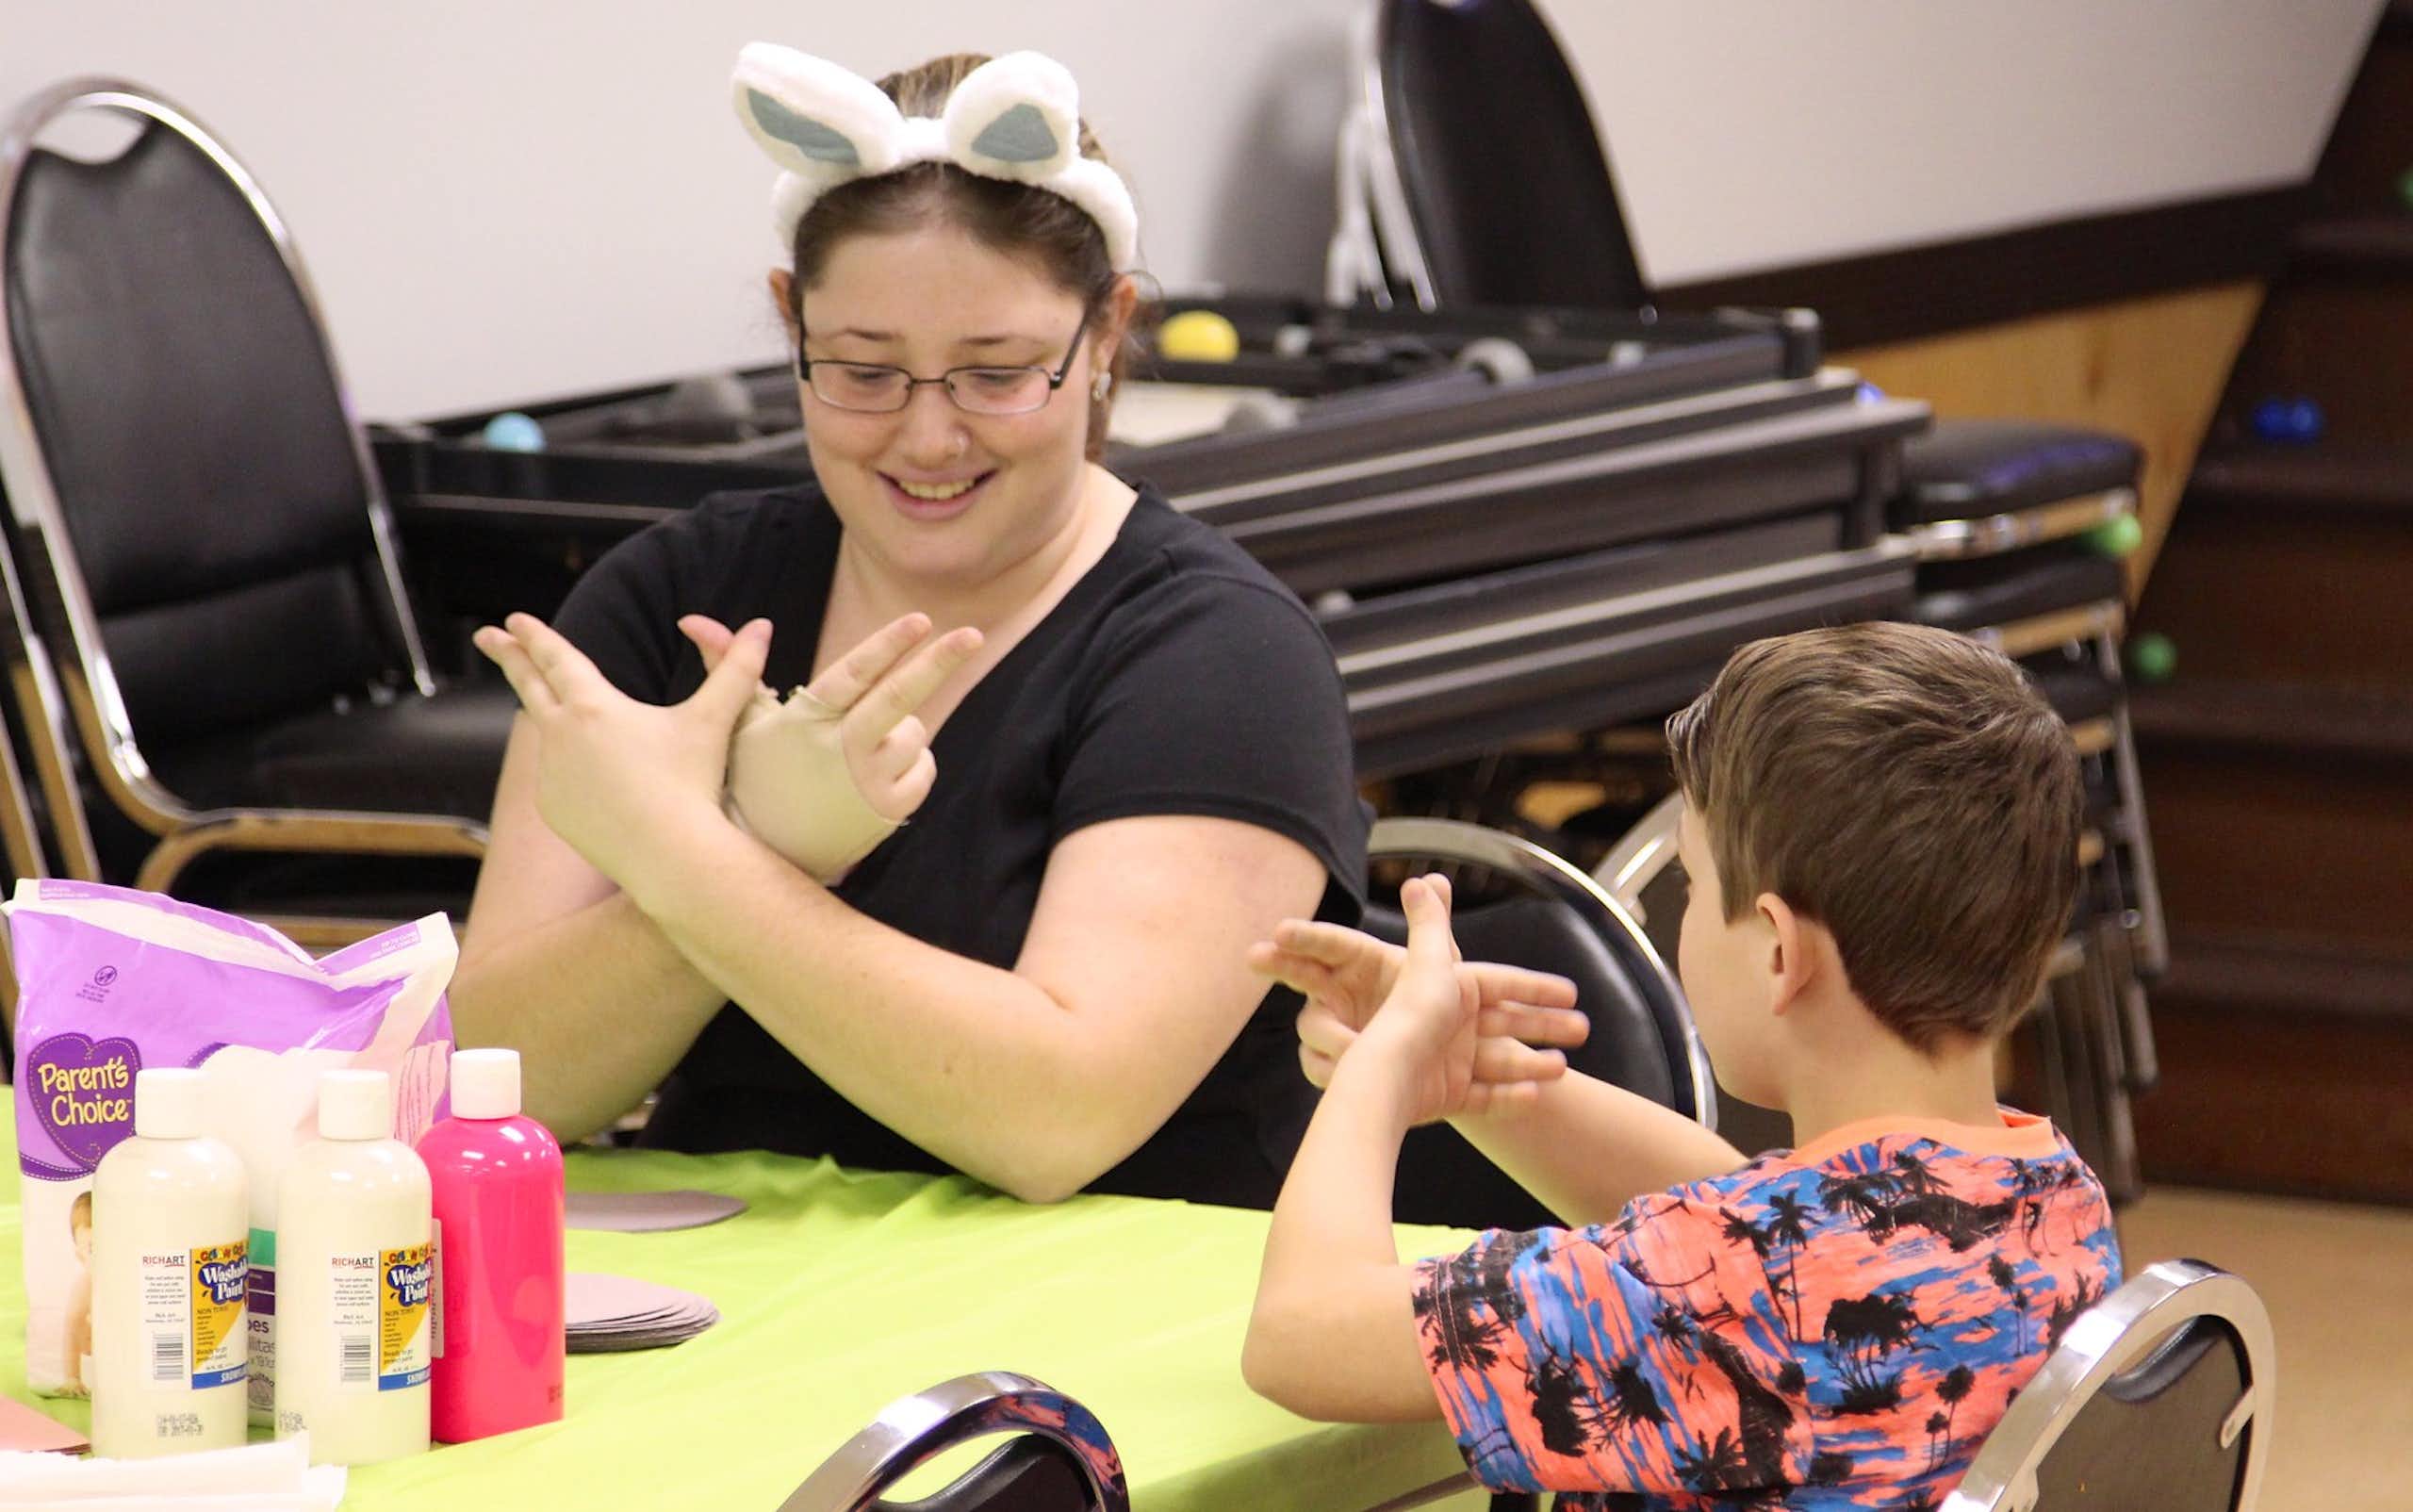 Adult seen in bunny ears at a table making a sign to a child making the same sign.